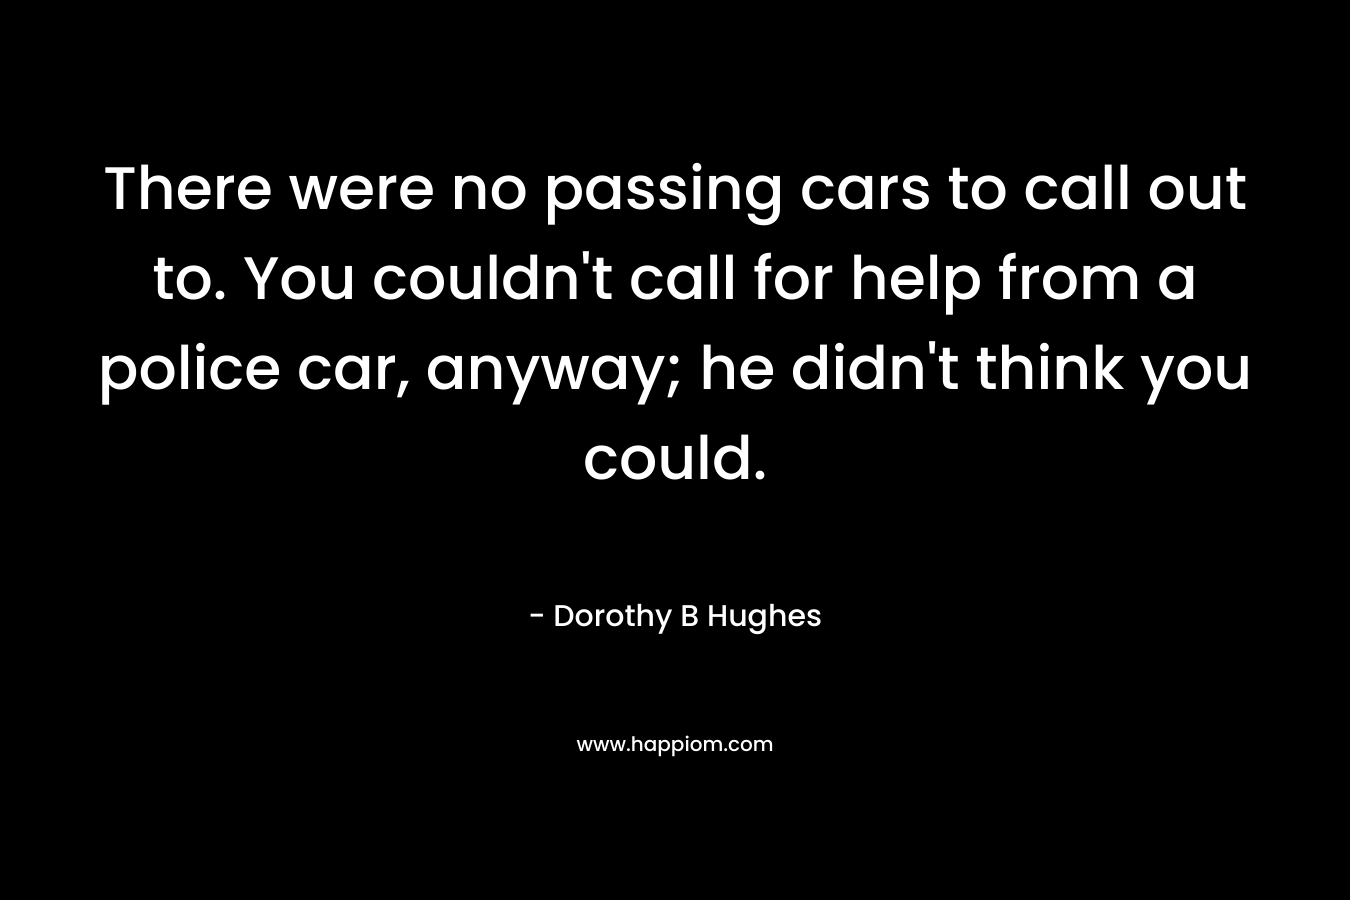 There were no passing cars to call out to. You couldn’t call for help from a police car, anyway; he didn’t think you could. – Dorothy B Hughes